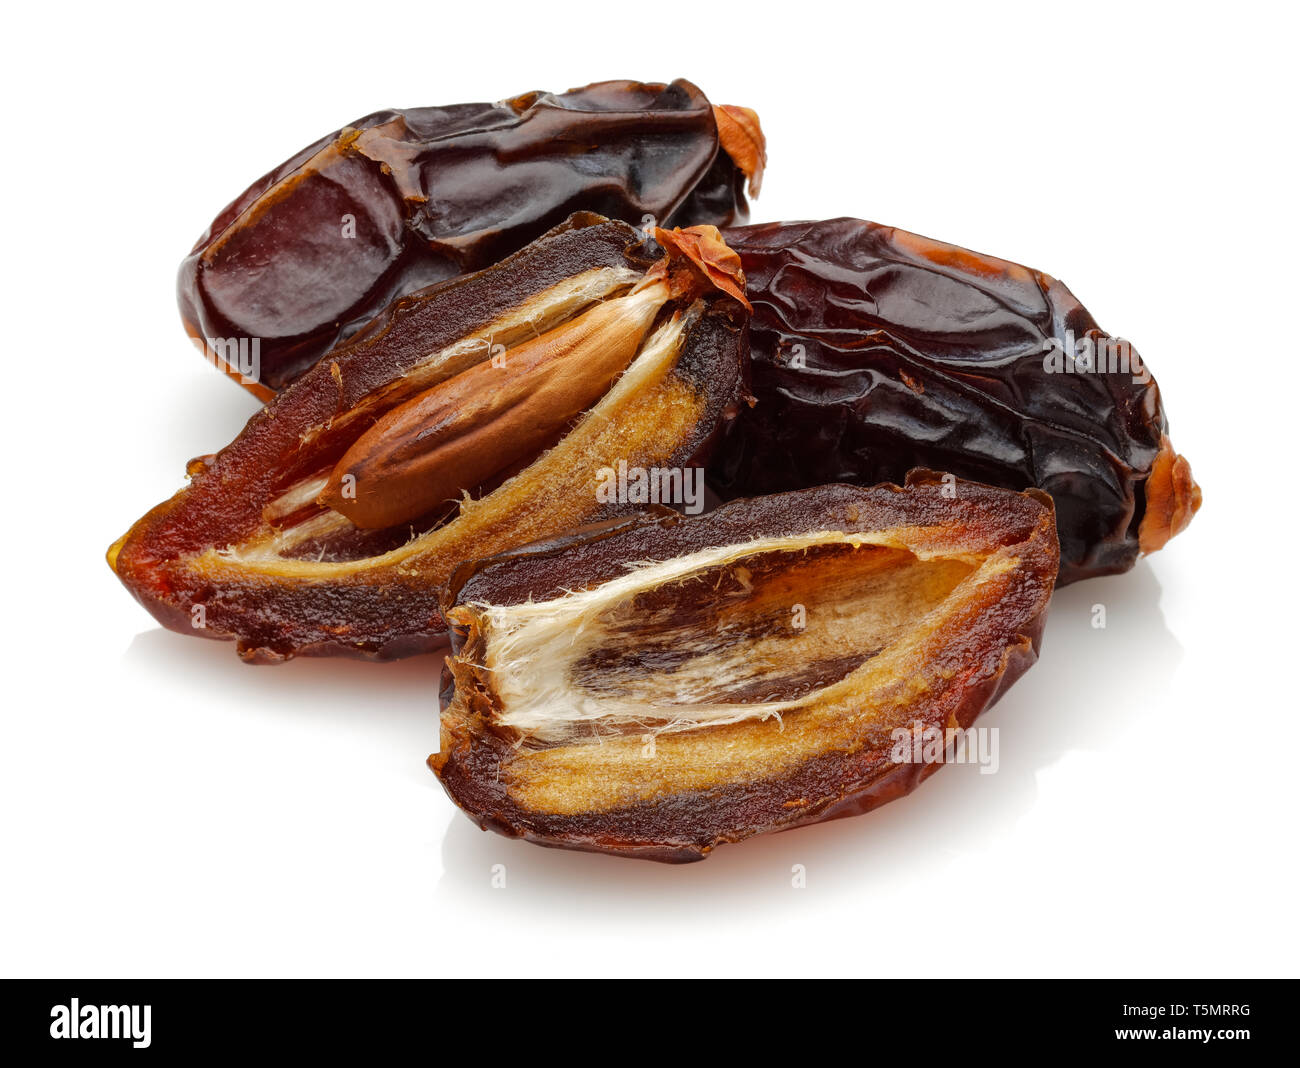 Dried date fruit isolated on white background Stock Photo